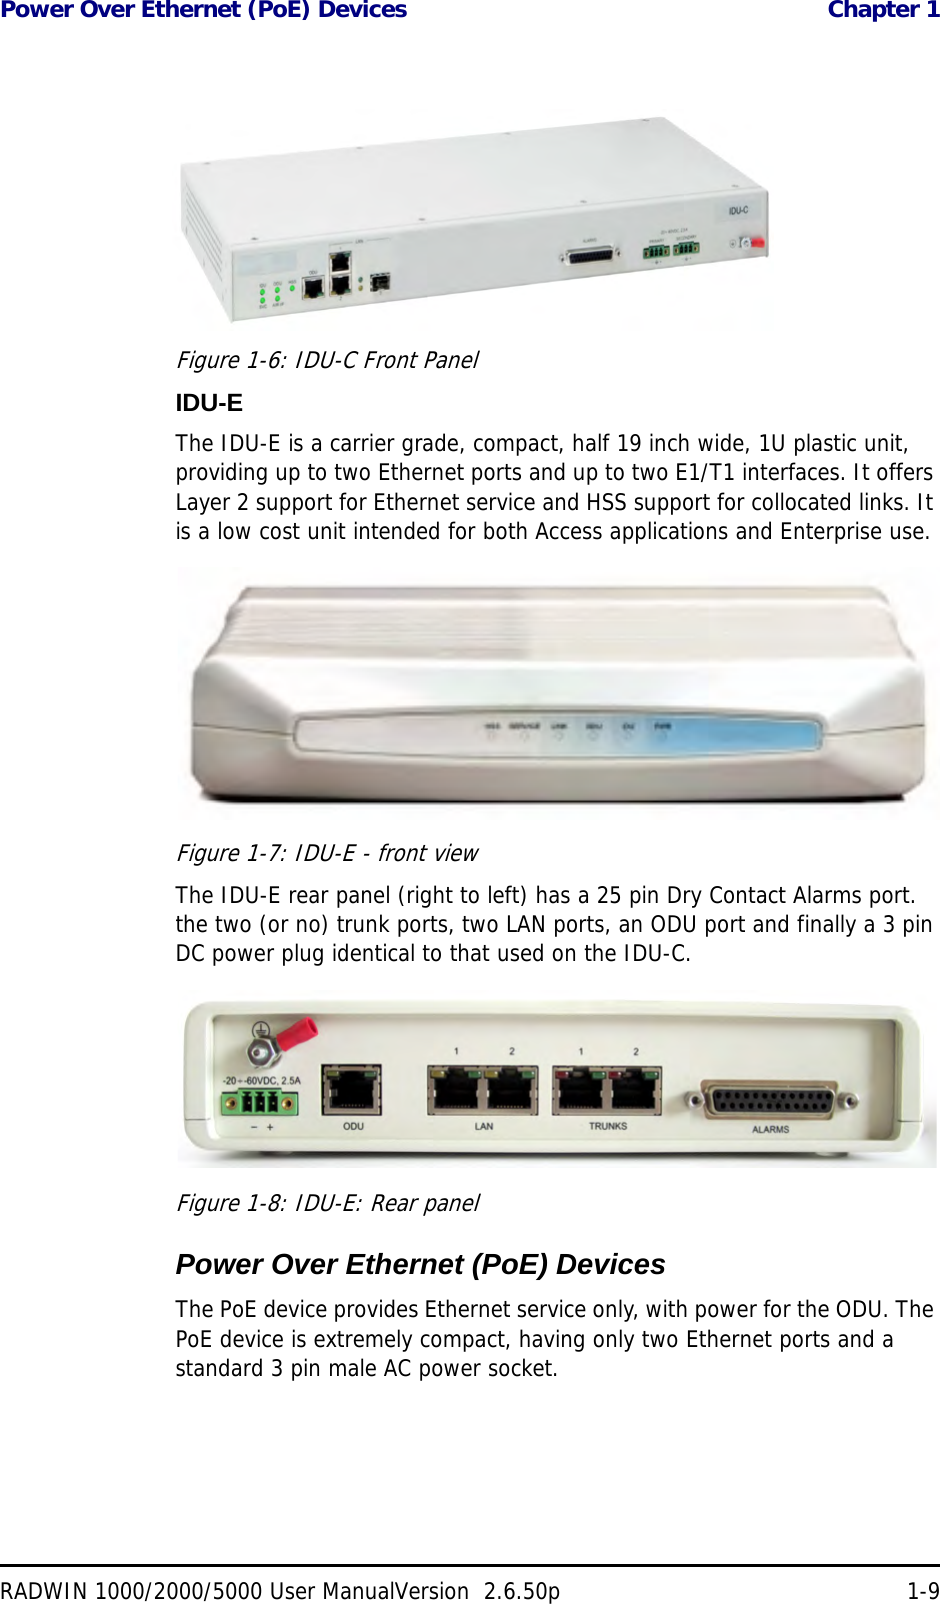 Power Over Ethernet (PoE) Devices  Chapter 1RADWIN 1000/2000/5000 User ManualVersion  2.6.50p 1-9Figure 1-6: IDU-C Front PanelIDU-EThe IDU-E is a carrier grade, compact, half 19 inch wide, 1U plastic unit, providing up to two Ethernet ports and up to two E1/T1 interfaces. It offers Layer 2 support for Ethernet service and HSS support for collocated links. It is a low cost unit intended for both Access applications and Enterprise use.Figure 1-7: IDU-E - front viewThe IDU-E rear panel (right to left) has a 25 pin Dry Contact Alarms port. the two (or no) trunk ports, two LAN ports, an ODU port and finally a 3 pin DC power plug identical to that used on the IDU-C.Figure 1-8: IDU-E: Rear panelPower Over Ethernet (PoE) DevicesThe PoE device provides Ethernet service only, with power for the ODU. The PoE device is extremely compact, having only two Ethernet ports and a standard 3 pin male AC power socket.